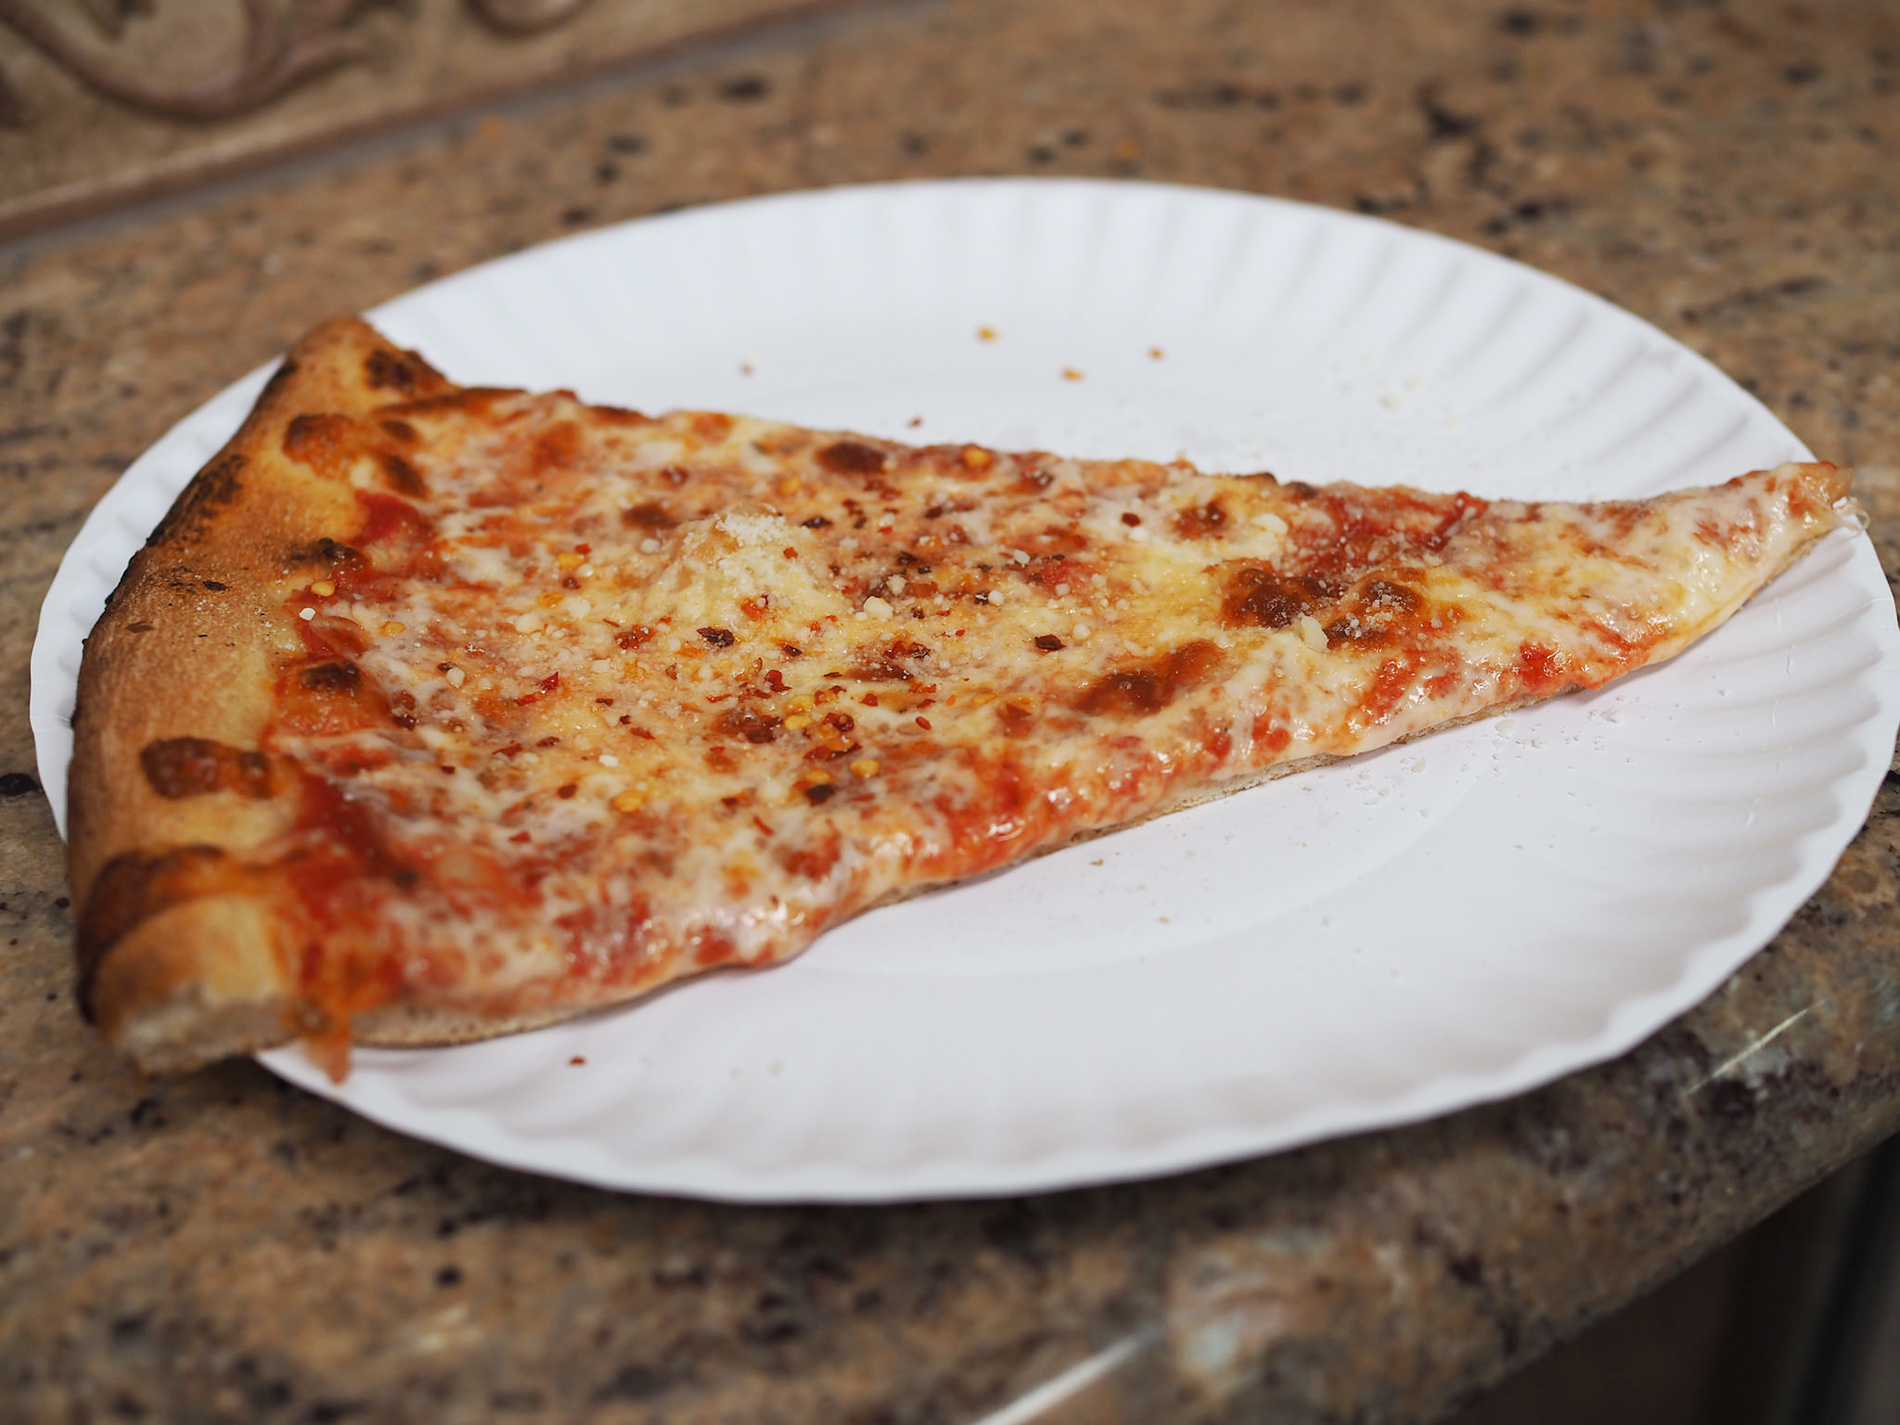 The Slow Death of NYC's Iconic $1 Pizza Slice